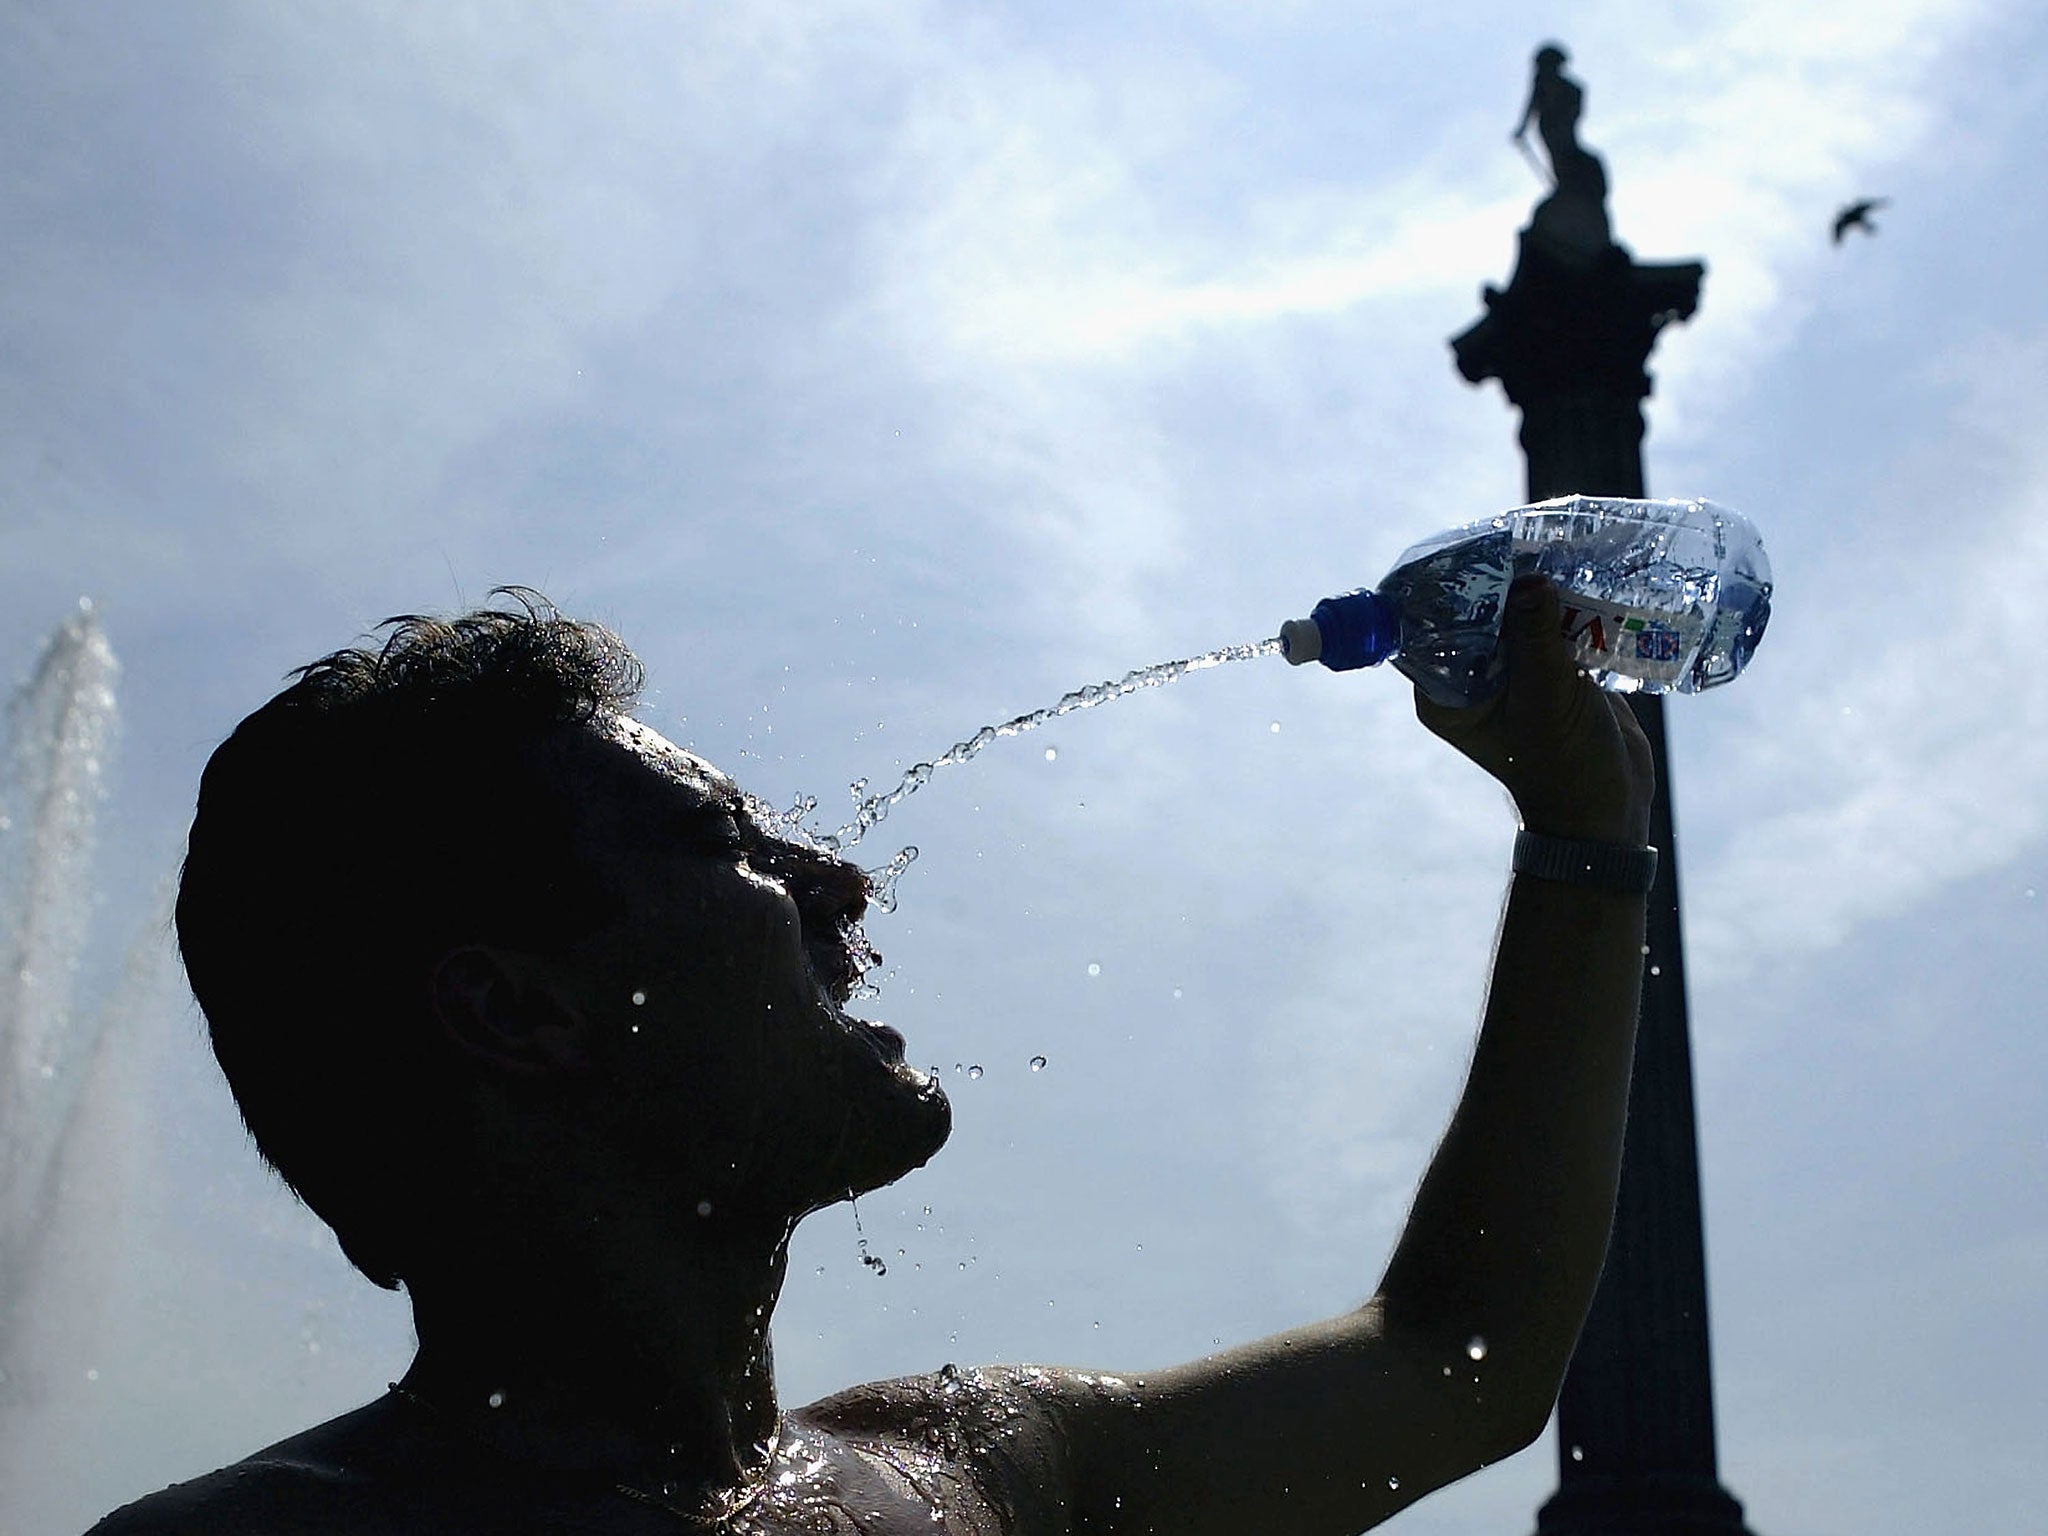 The UK is being gripped by a heatwave